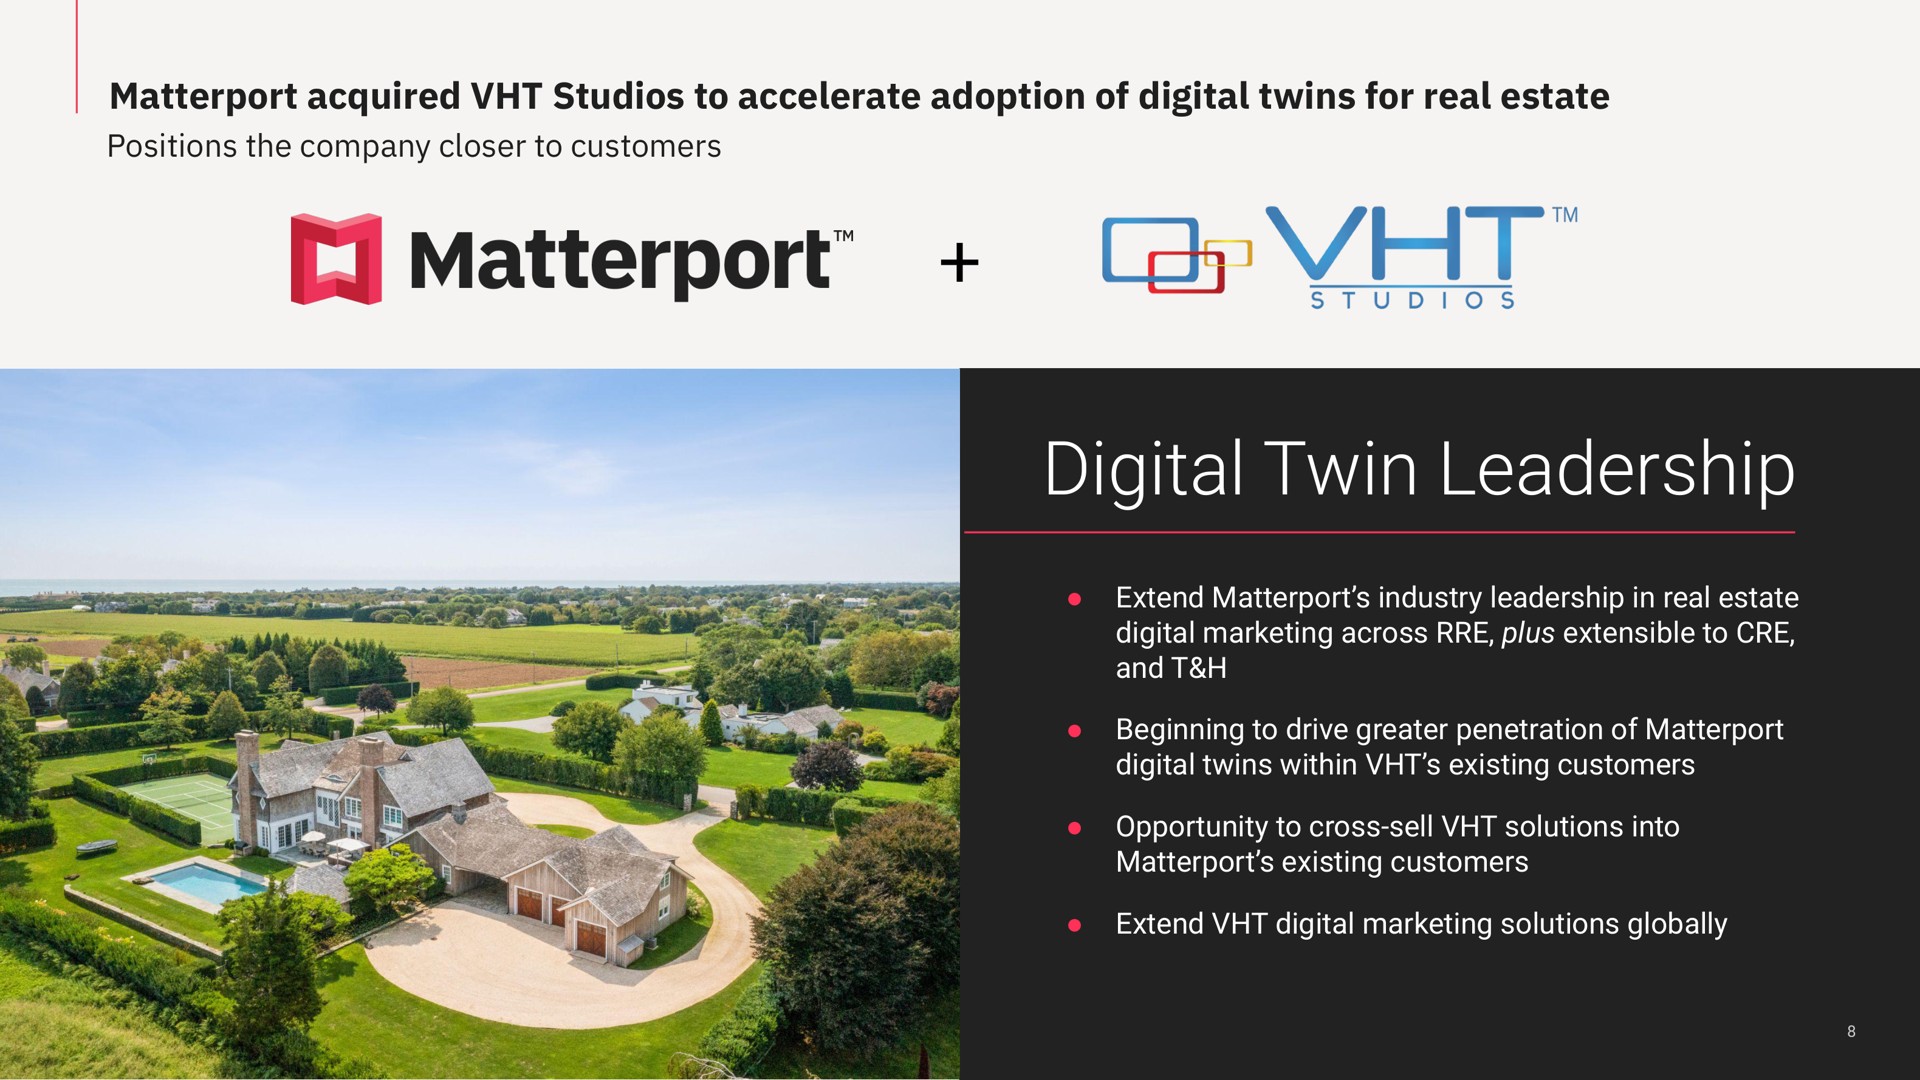 acquired studios to accelerate adoption of digital twins for real estate digital twin leadership | Matterport